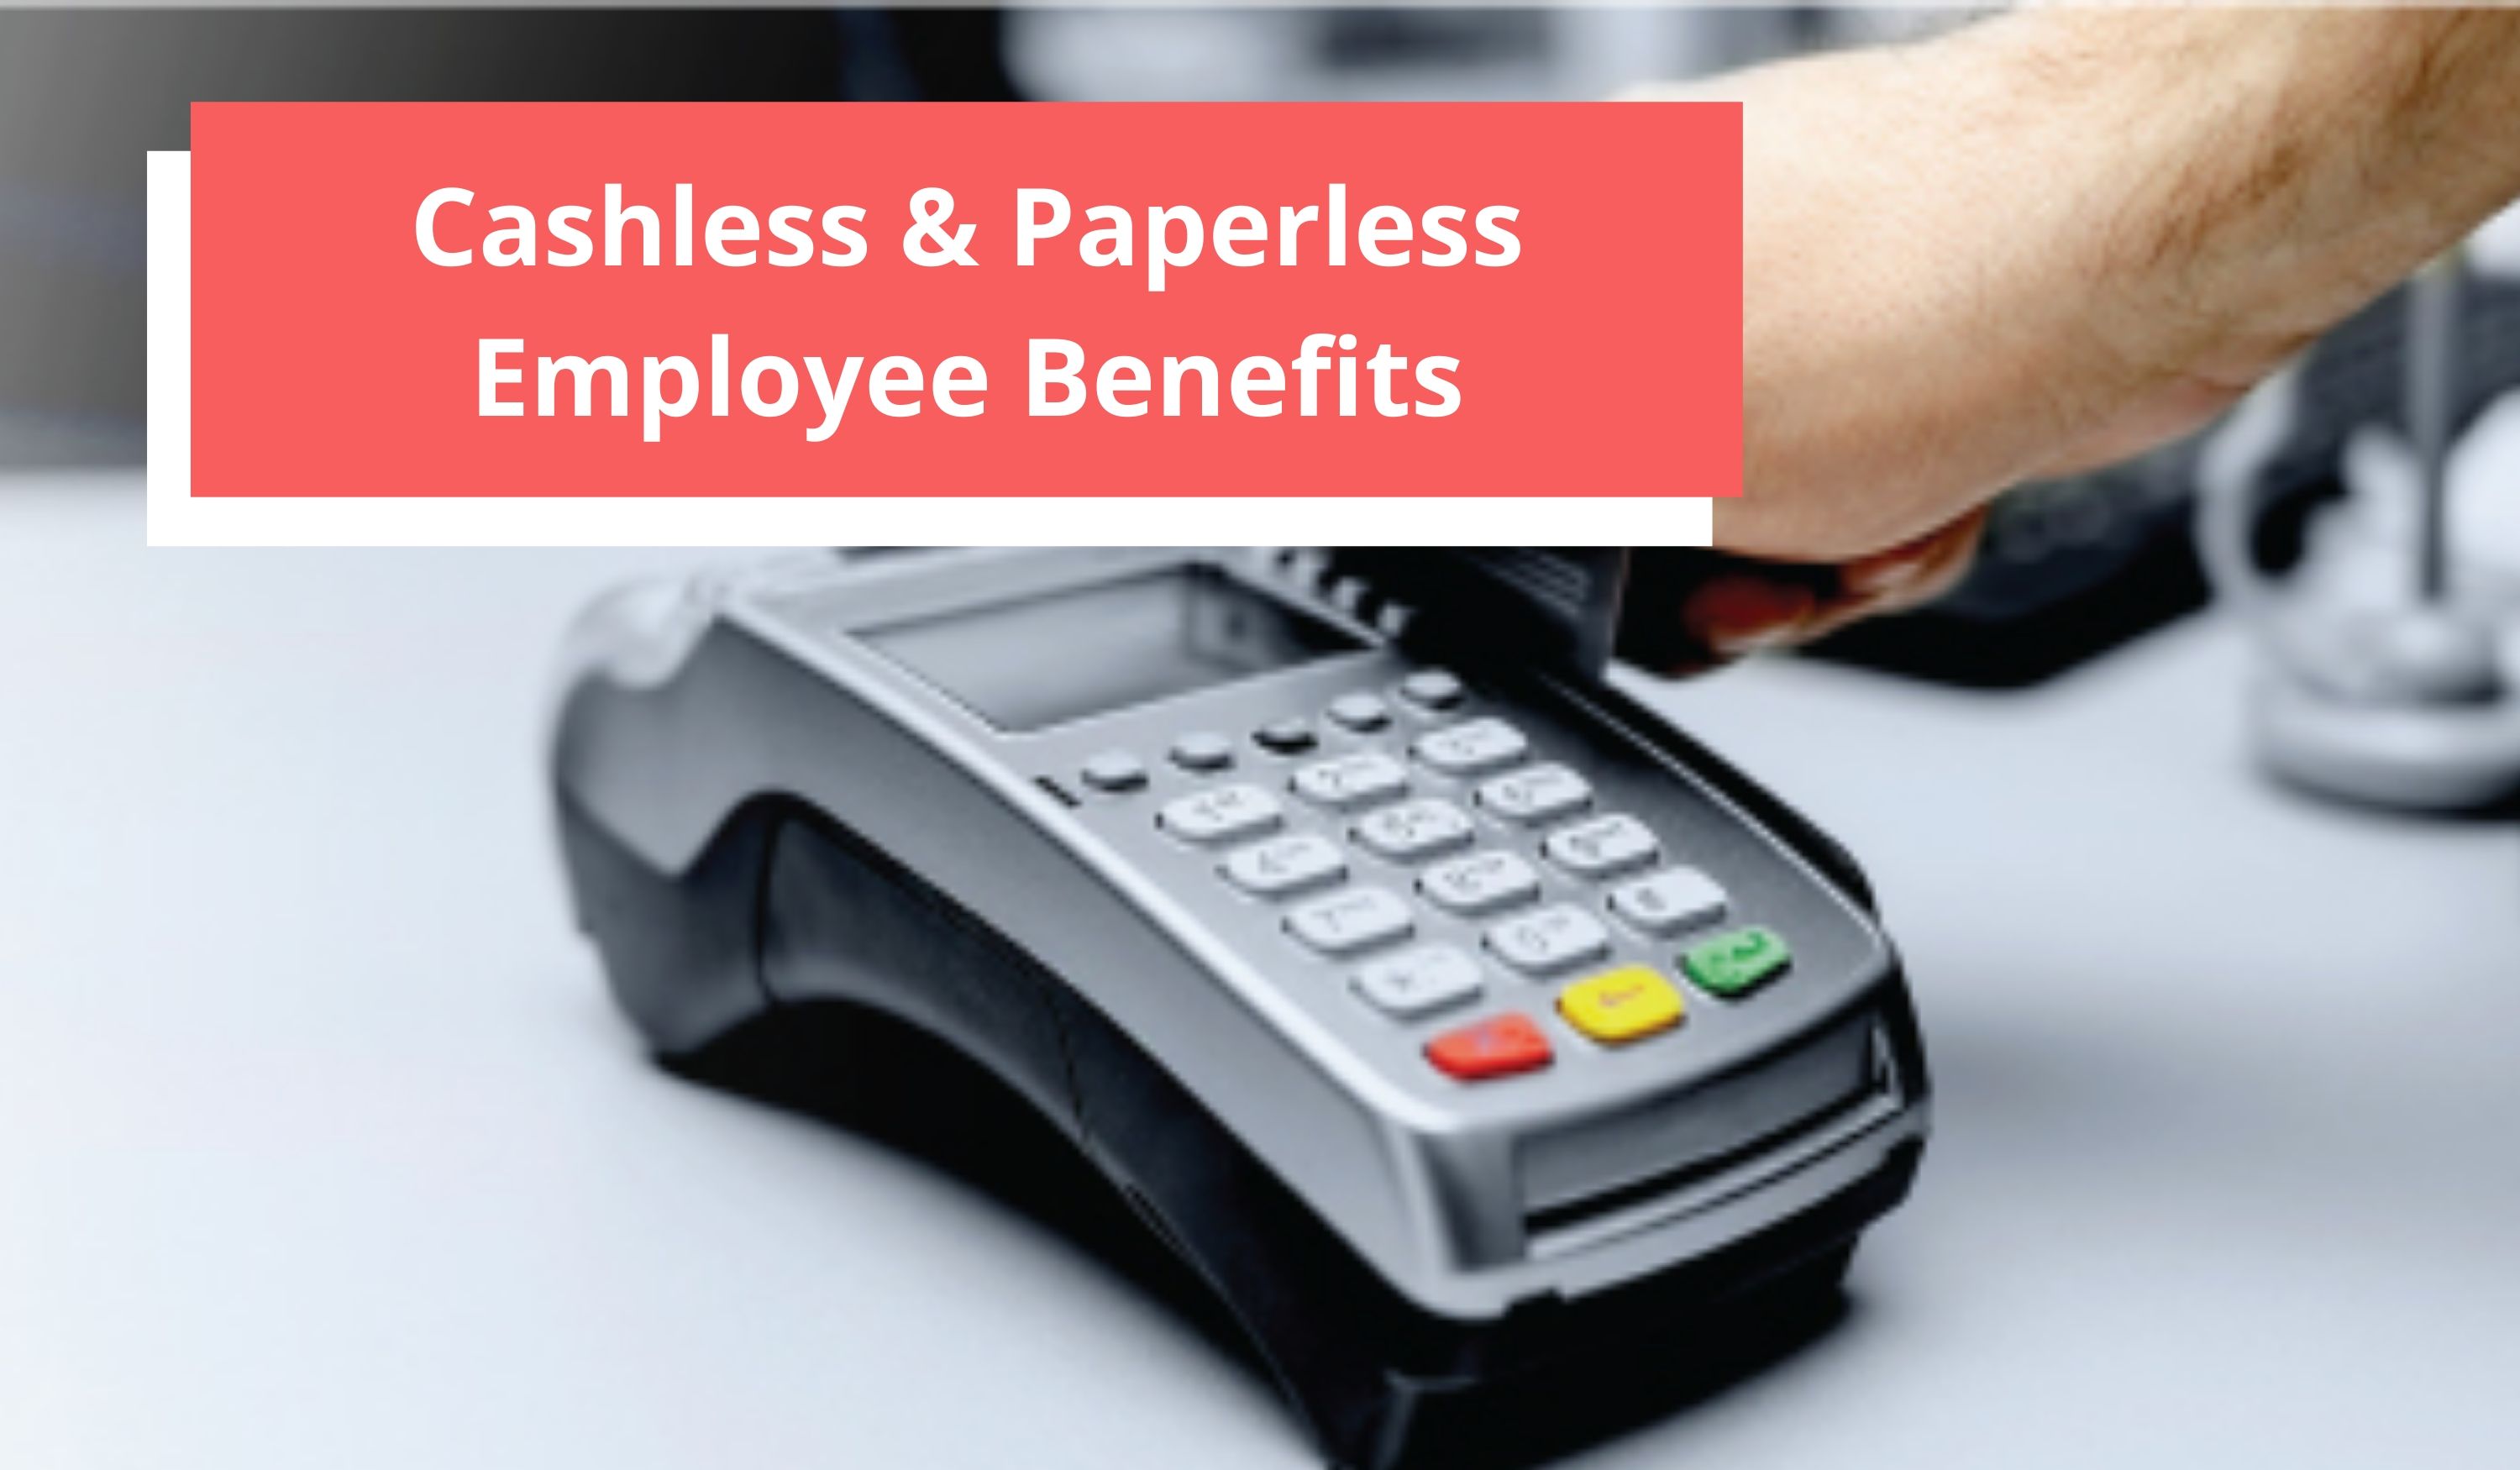 How technology can help deliver seamless Employee Benefits Cashless & Paperless